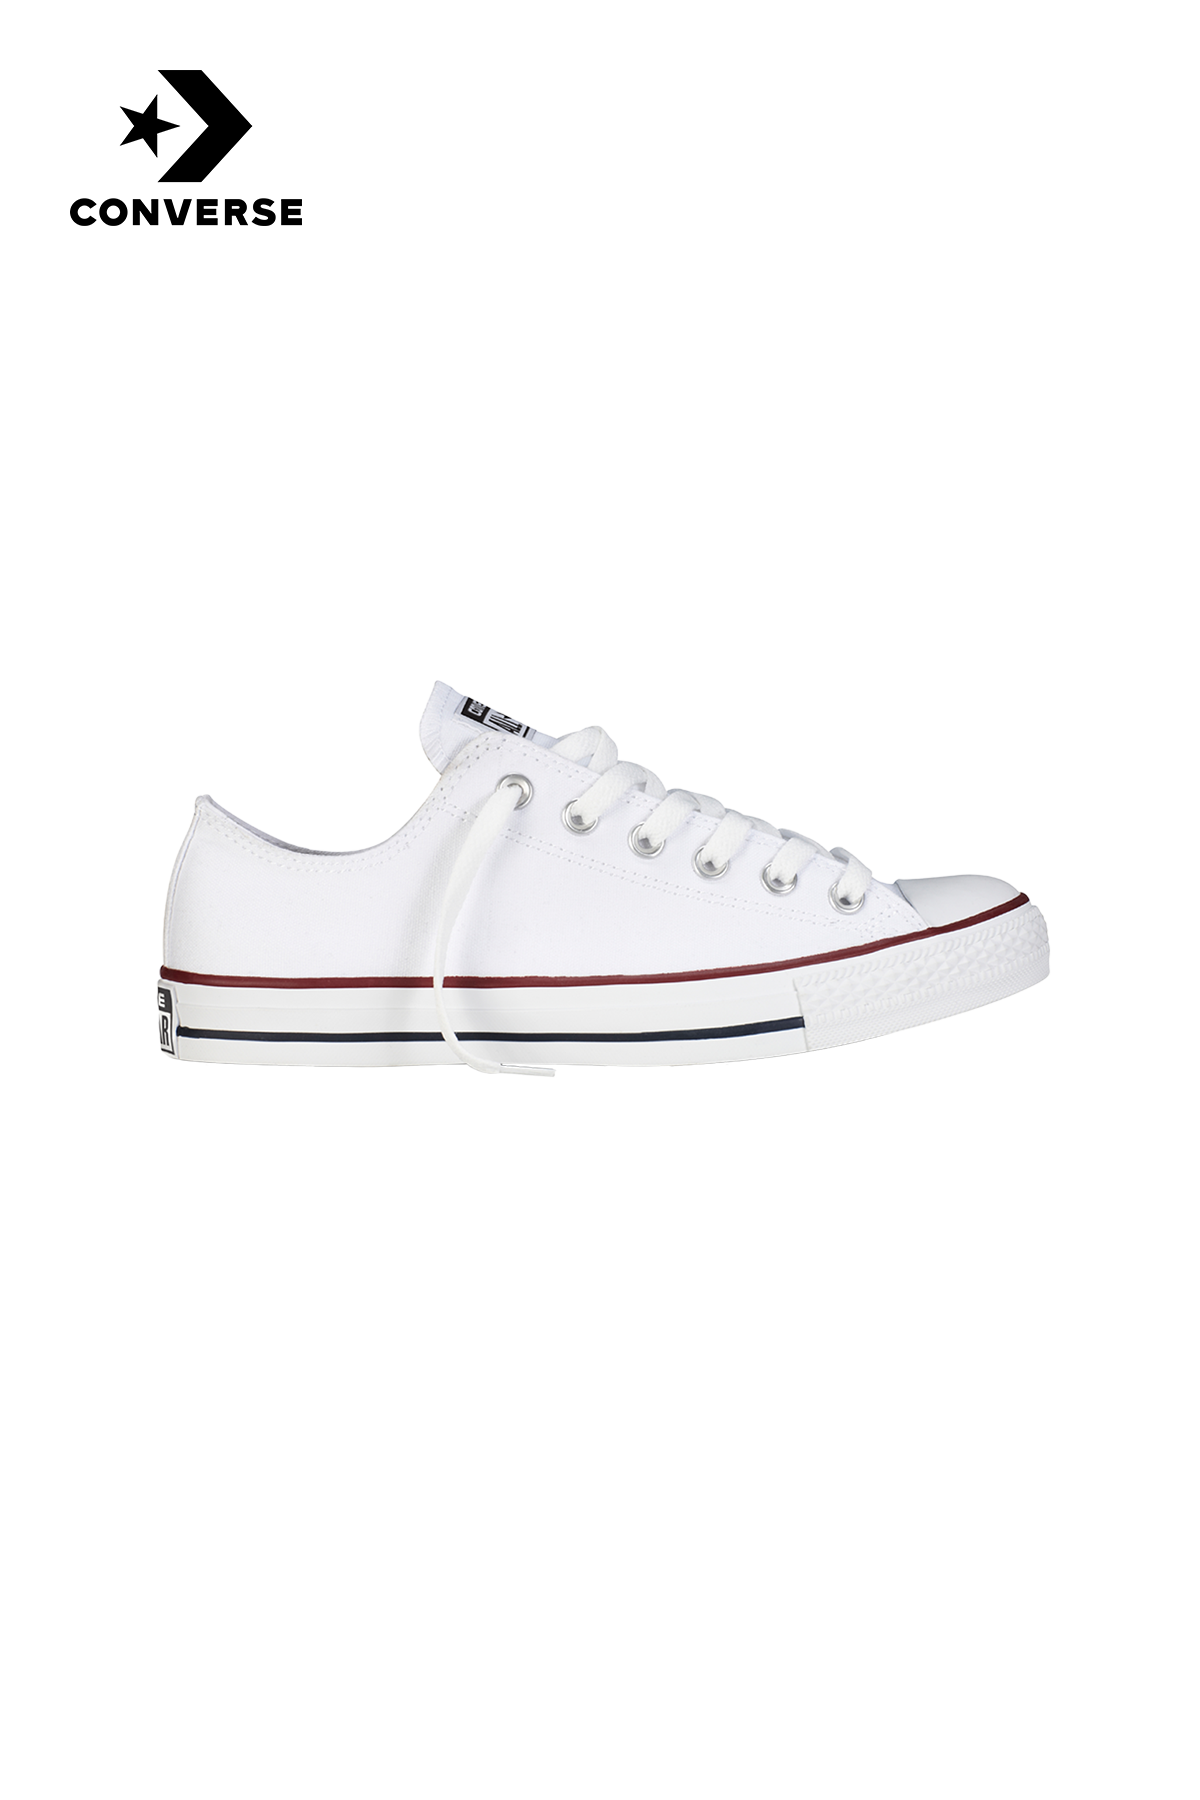 Boys Converse All Stars Low White | America Today